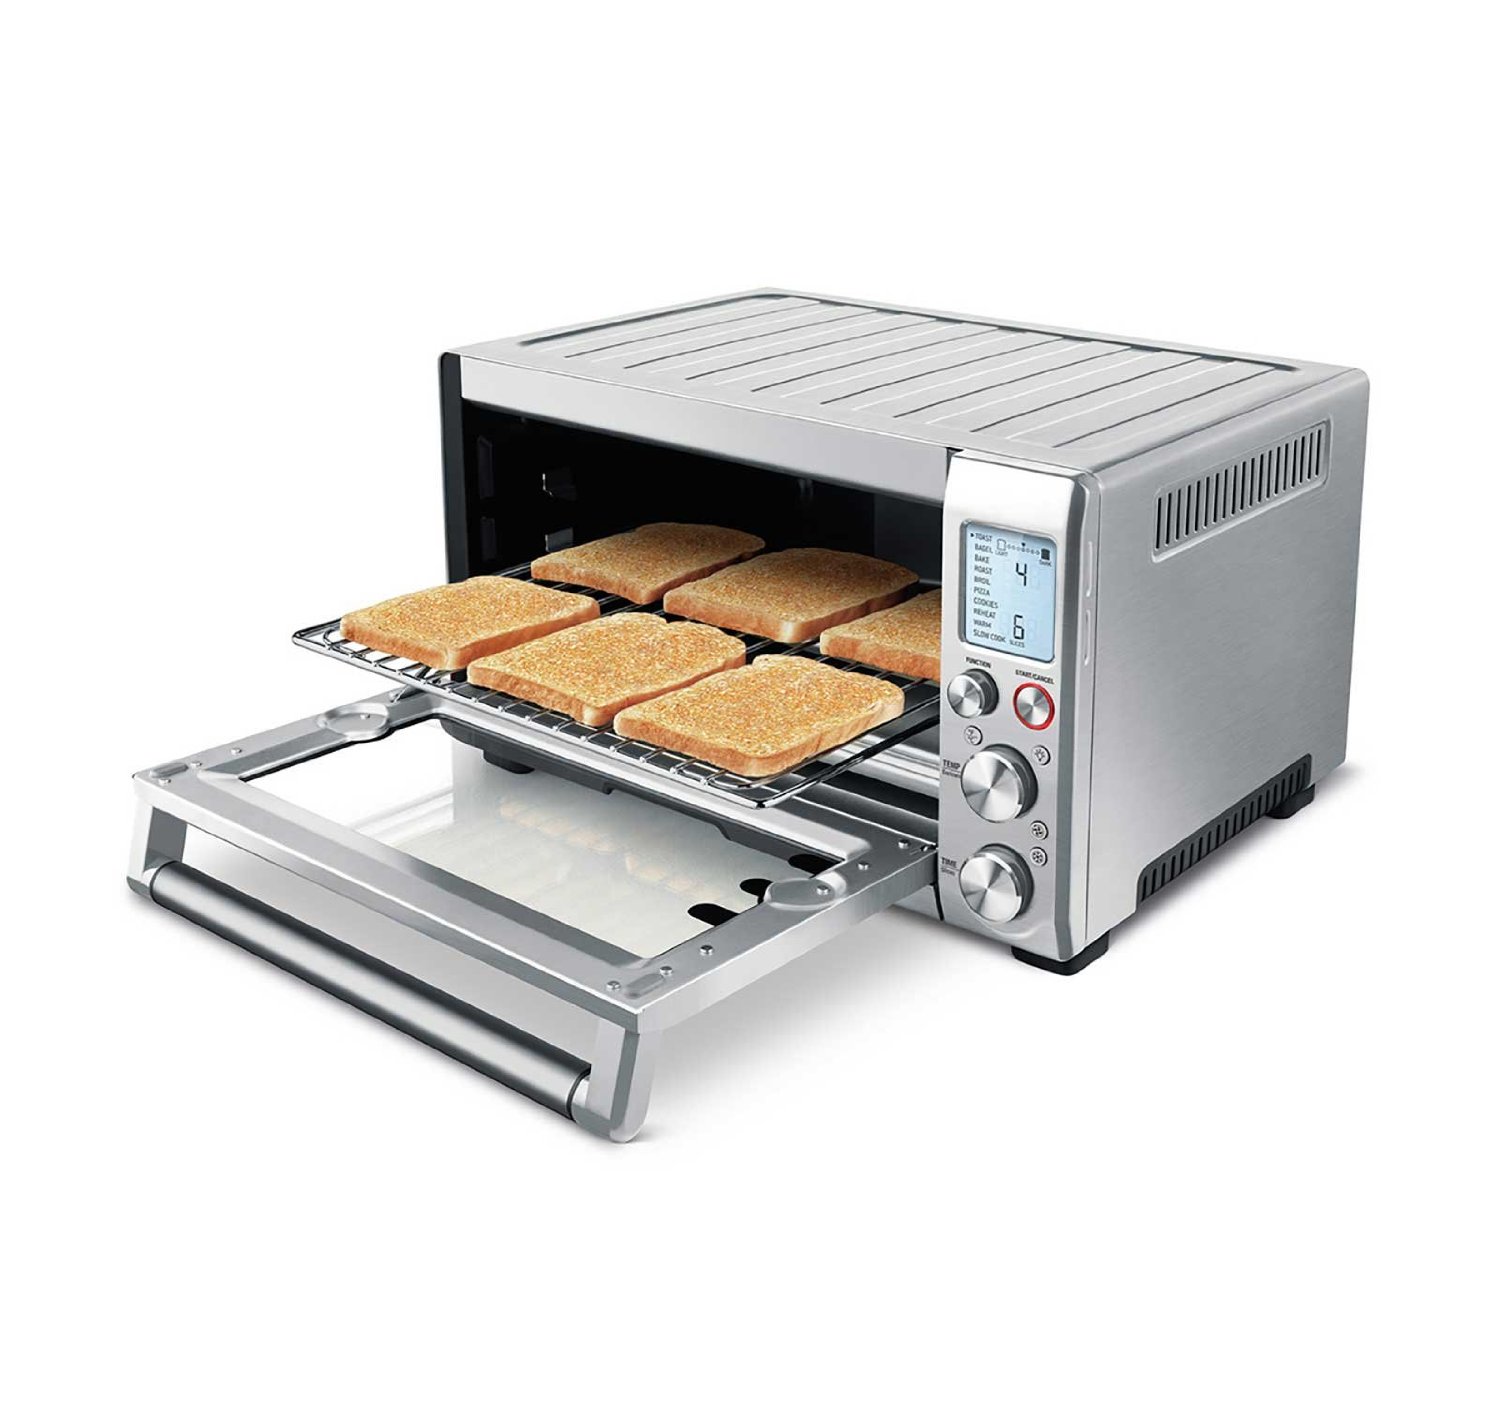 Breville Smart Oven Pro Toaster Oven with Element IQ, 1800 W, Stainless Steel - image 3 of 4